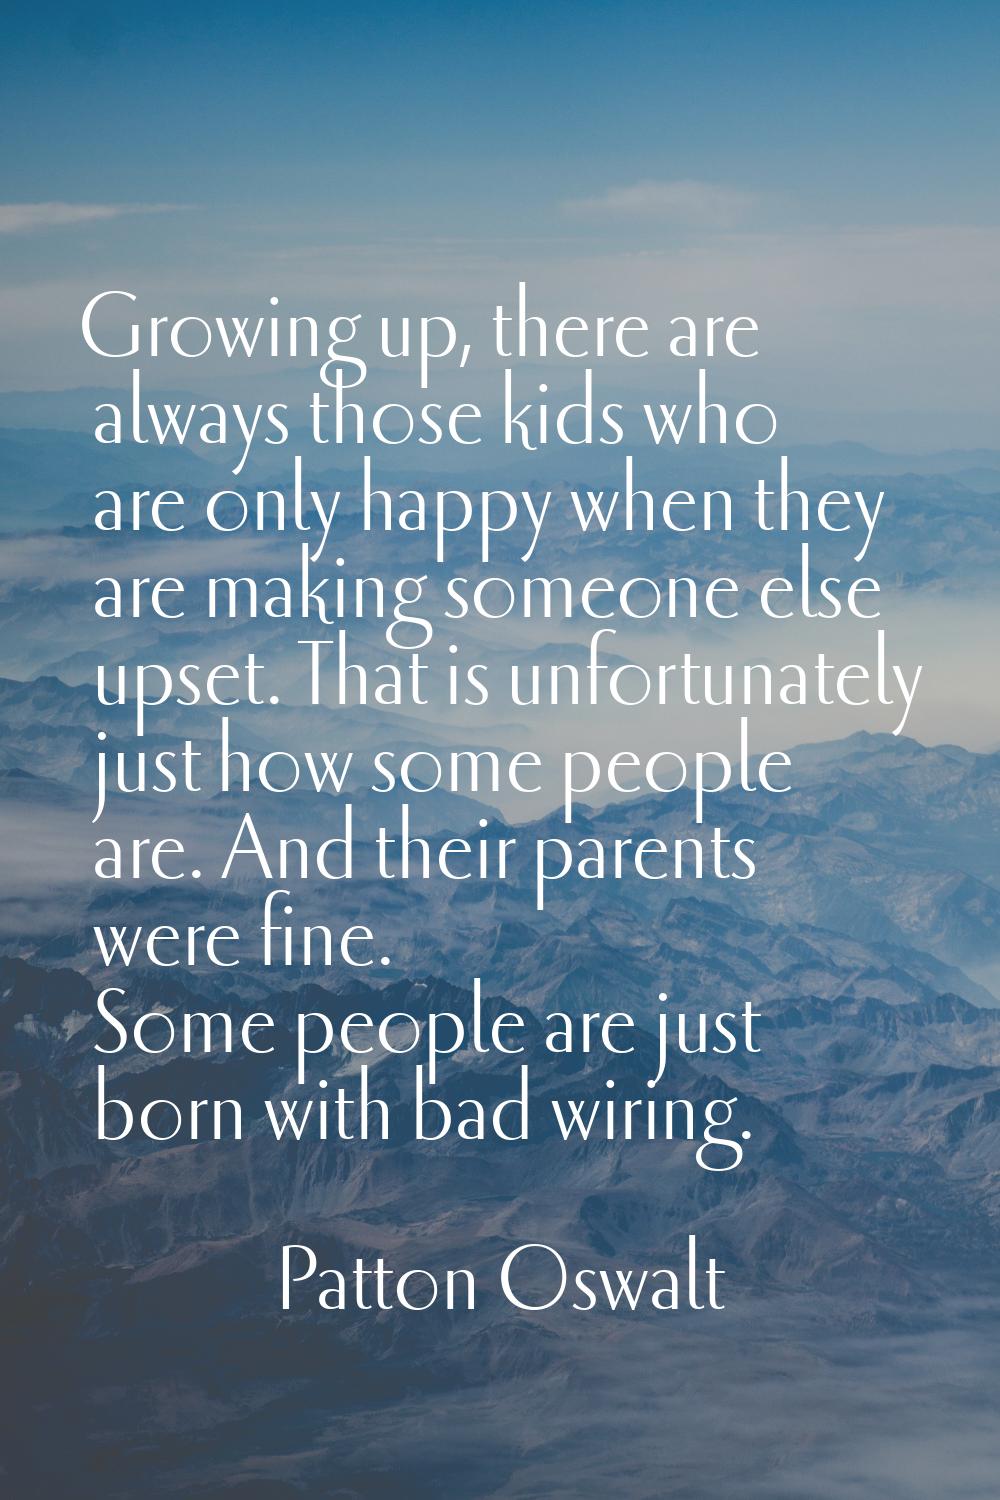 Growing up, there are always those kids who are only happy when they are making someone else upset.